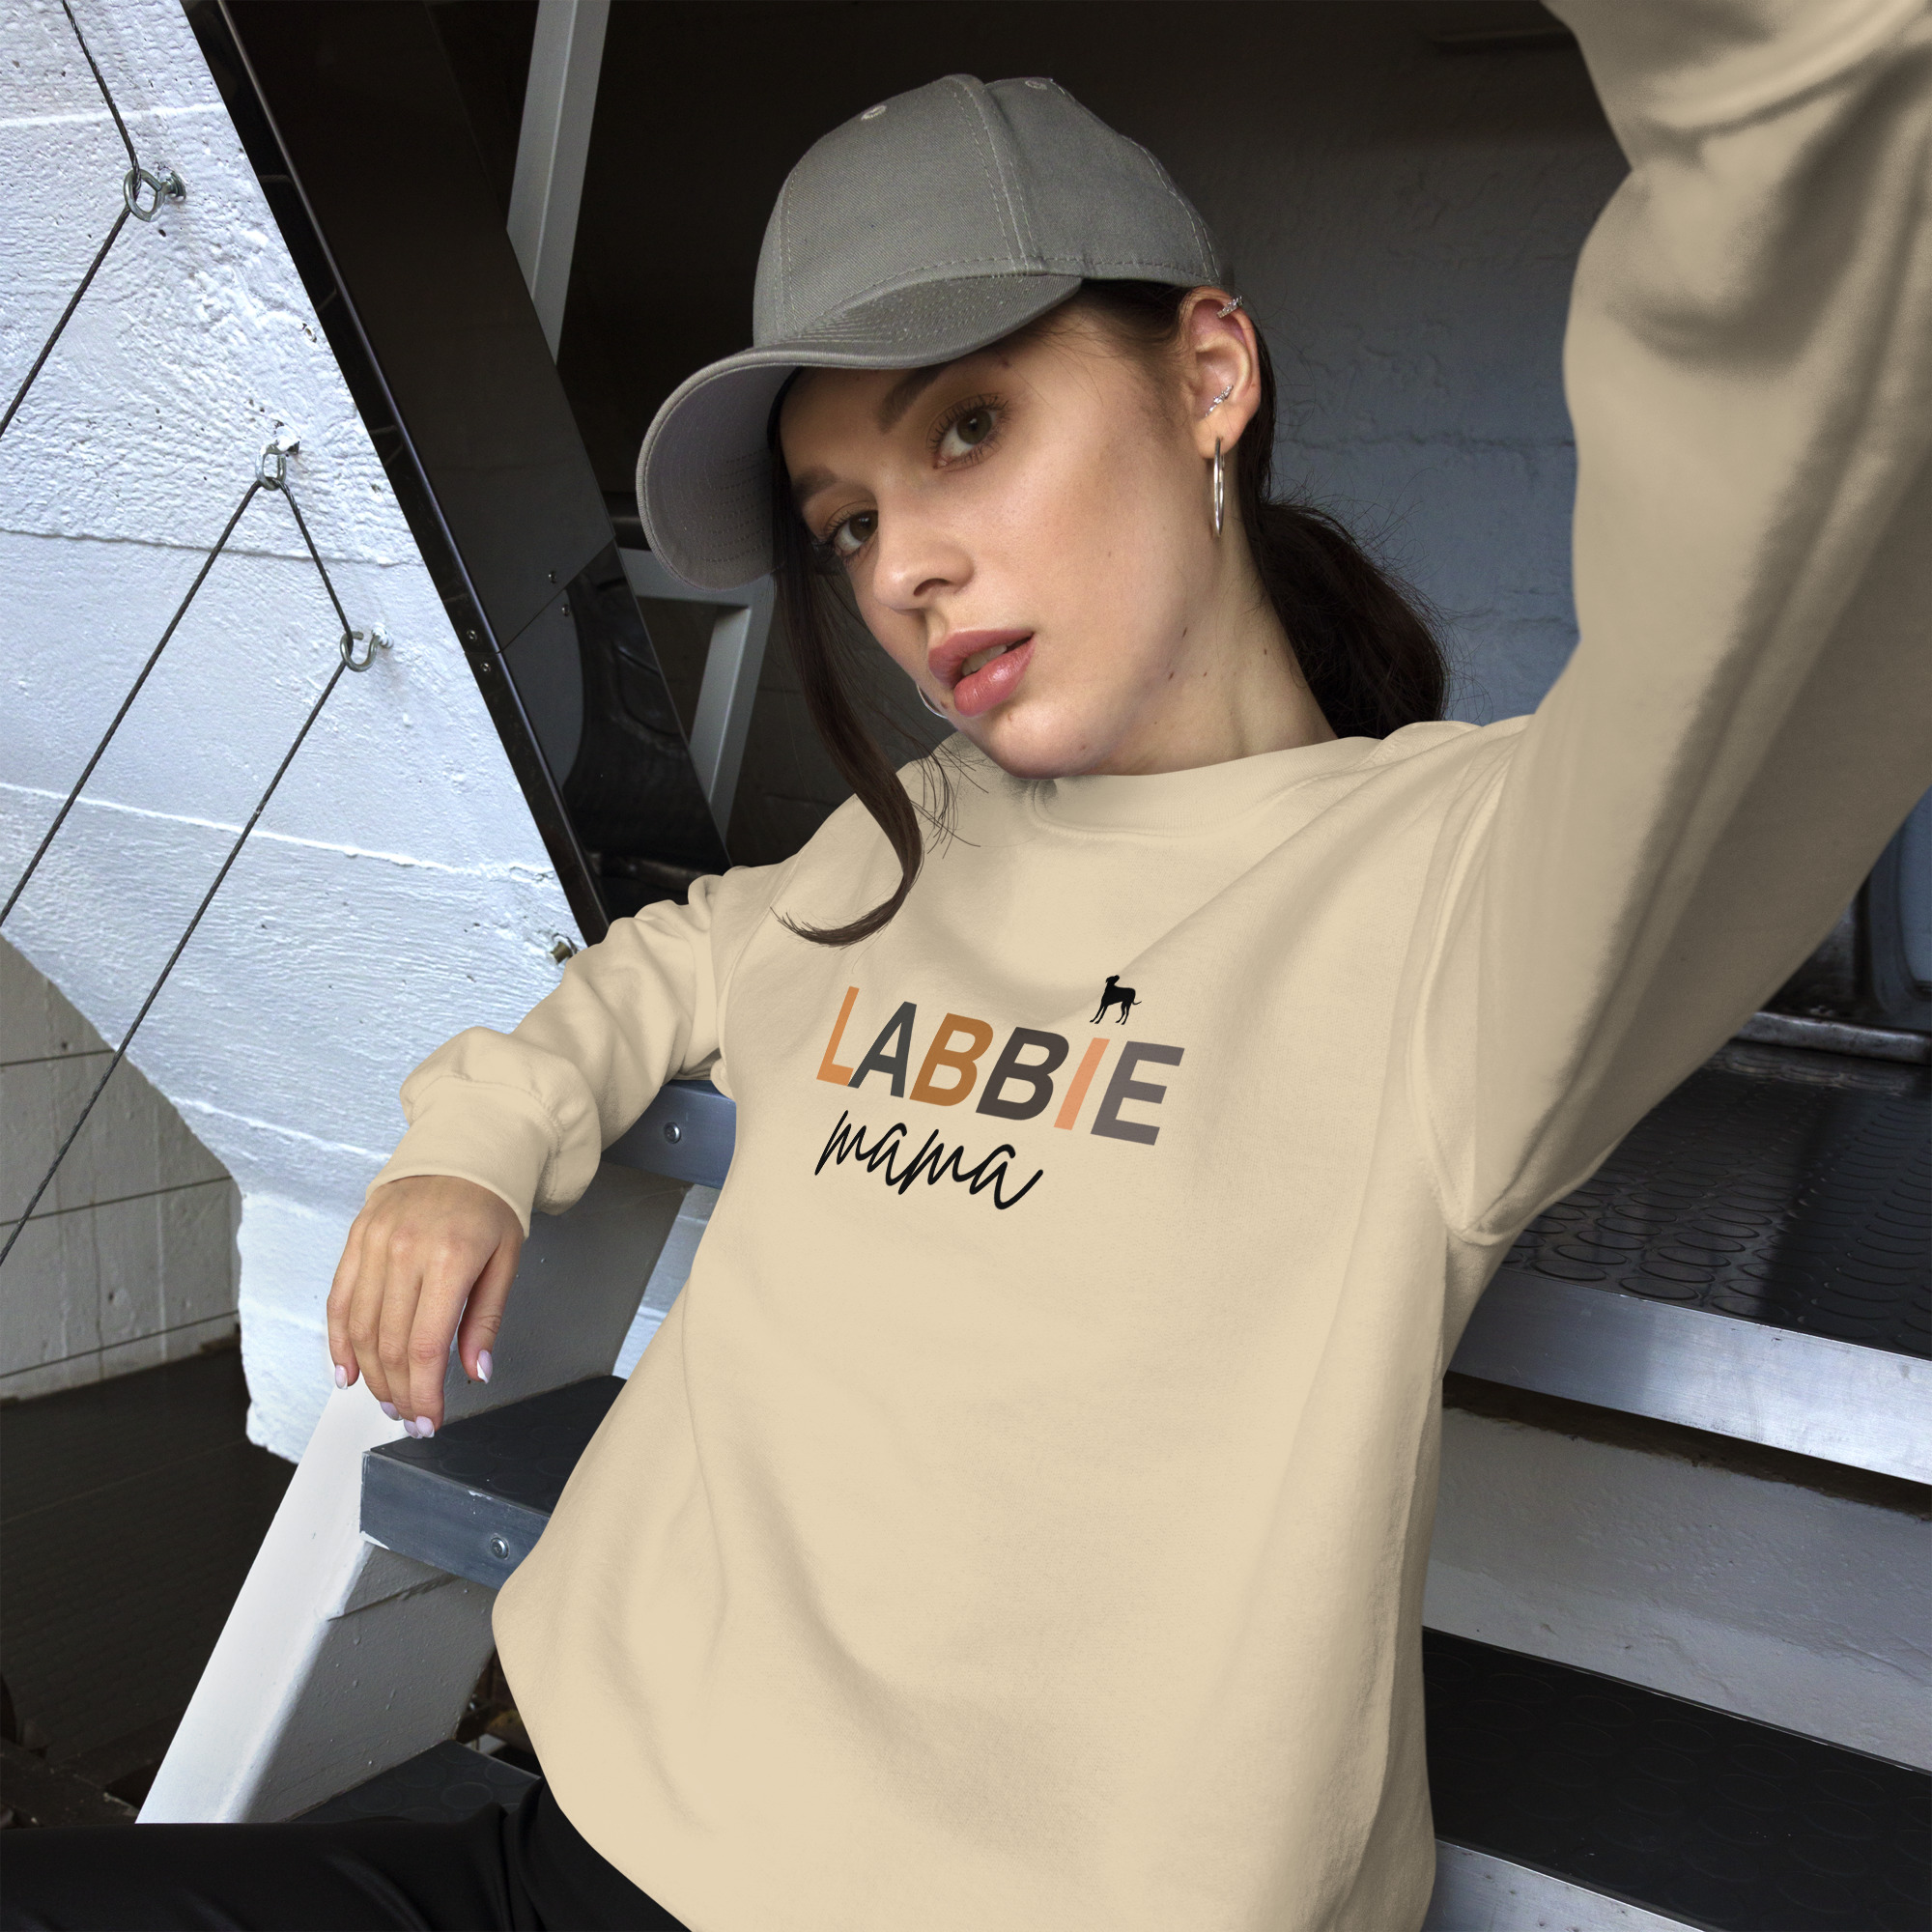 As a Labbie mama, your heart is full of love for your loyal Labrador companion. Now, you can wear your pride and affection with our "Labbie Mama" Women's Sweatshirt, designed to keep you cozy in the colder months while making a bold statement about your special bond with your four-legged friend.